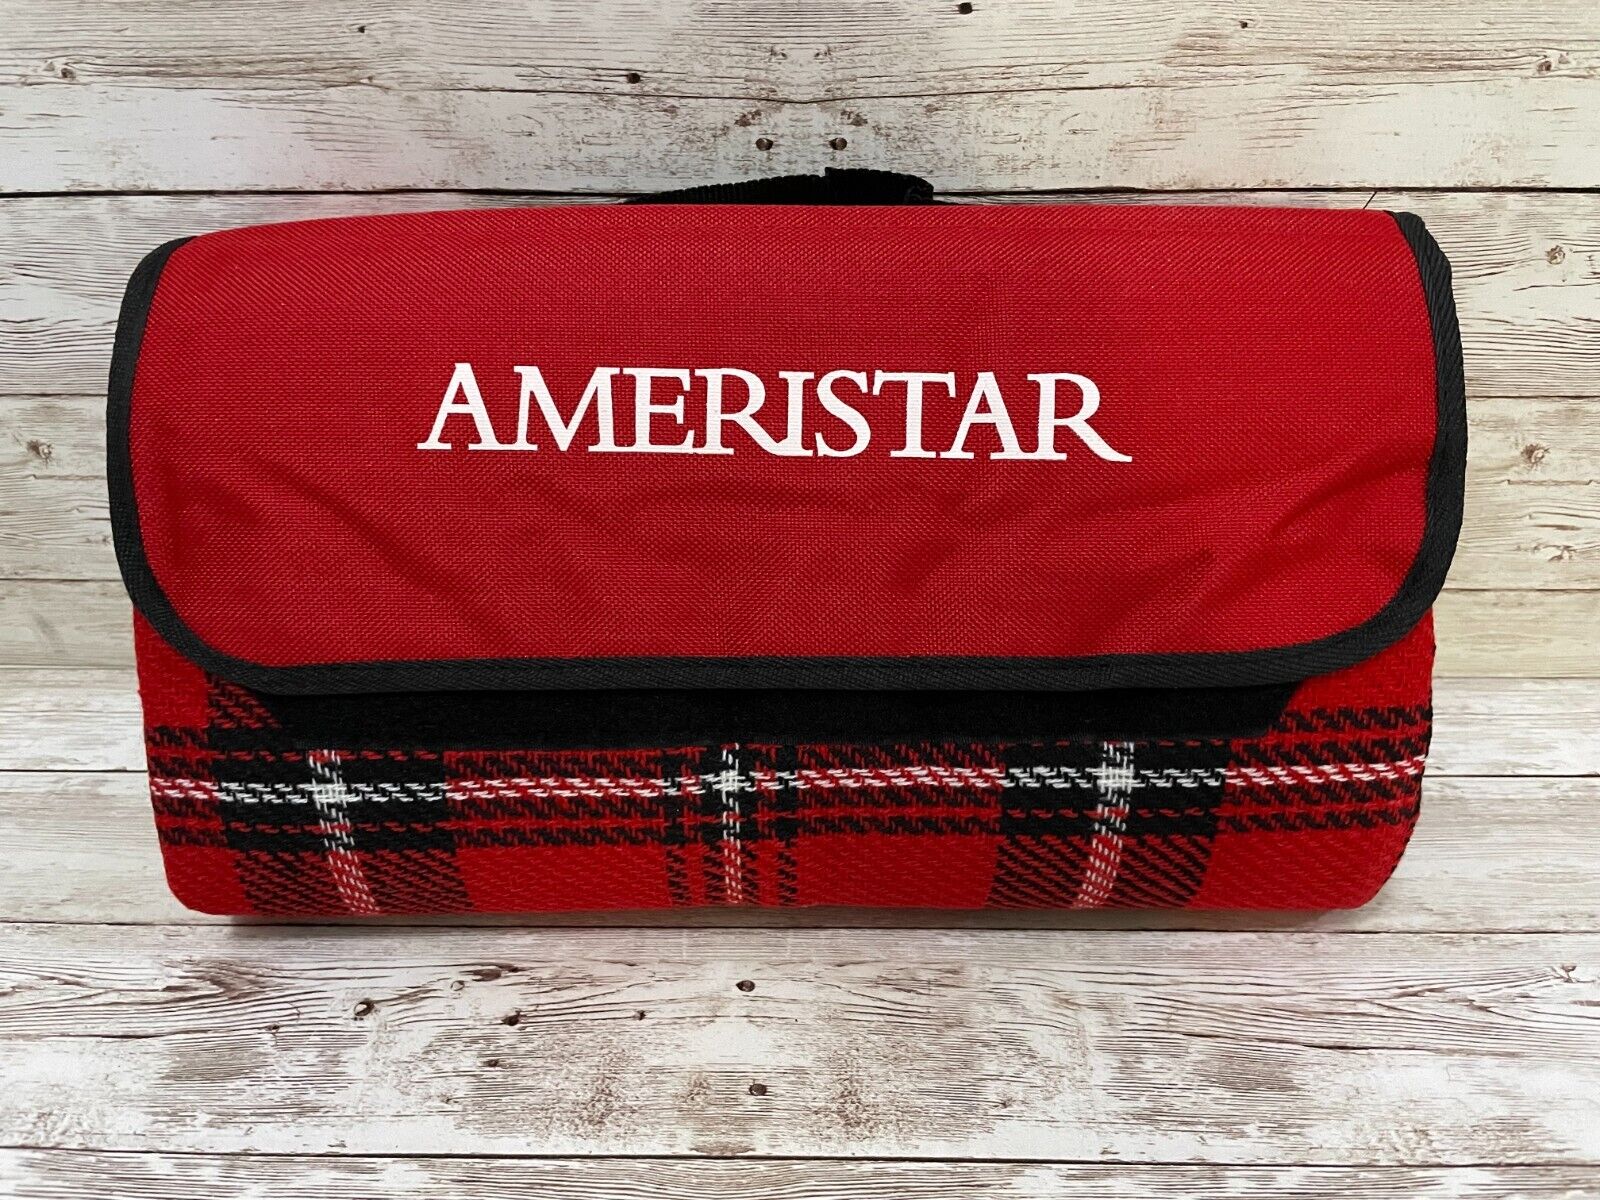 Ameristar Hotel & Casino Red Plaid Compact Blanket Promotional Item